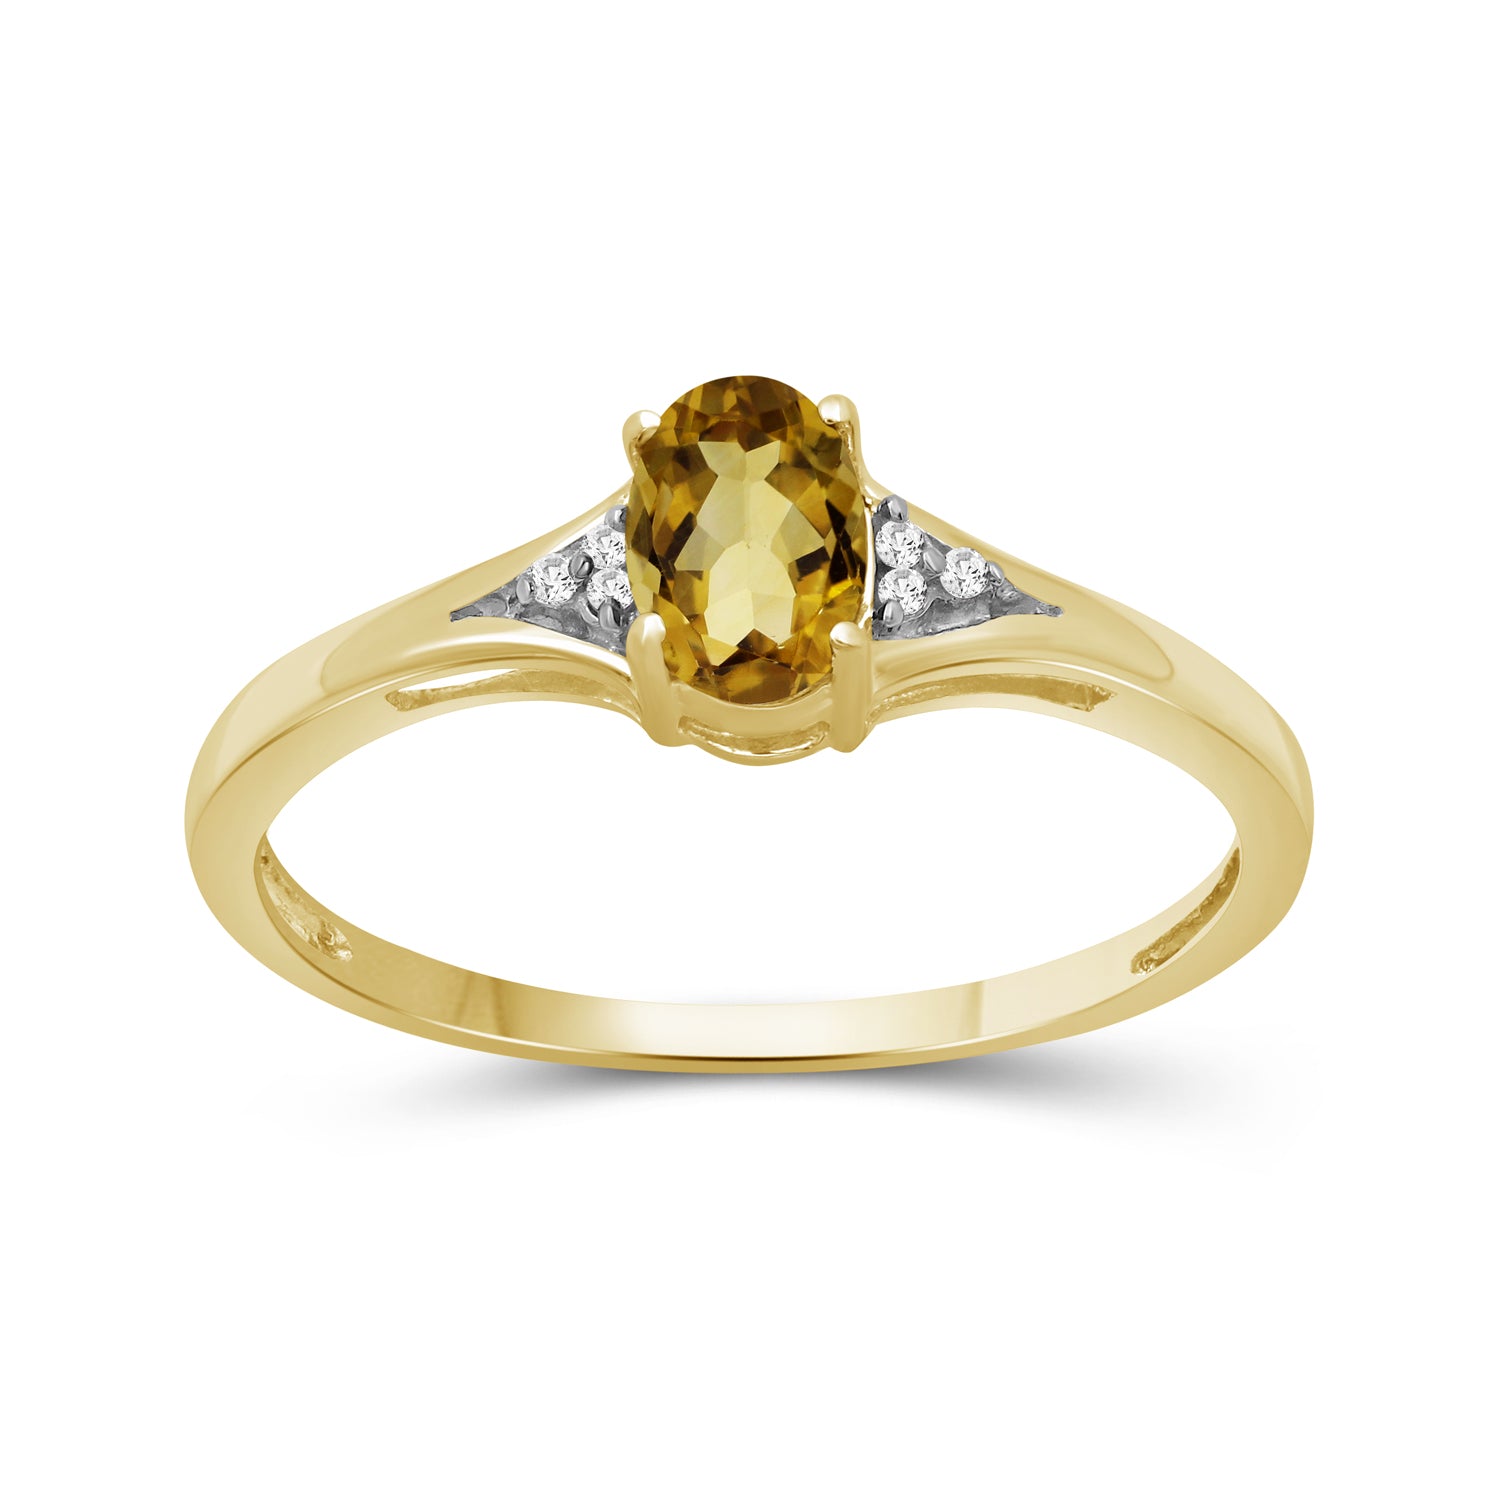 Citrine Ring November Birthstone Jewelry – 0.40 Carat Citrine 14K Gold Over Silver Ring Jewelry with White Diamond Accent – Gemstone Rings with Hypoallergenic 14K Gold Over Silver Band